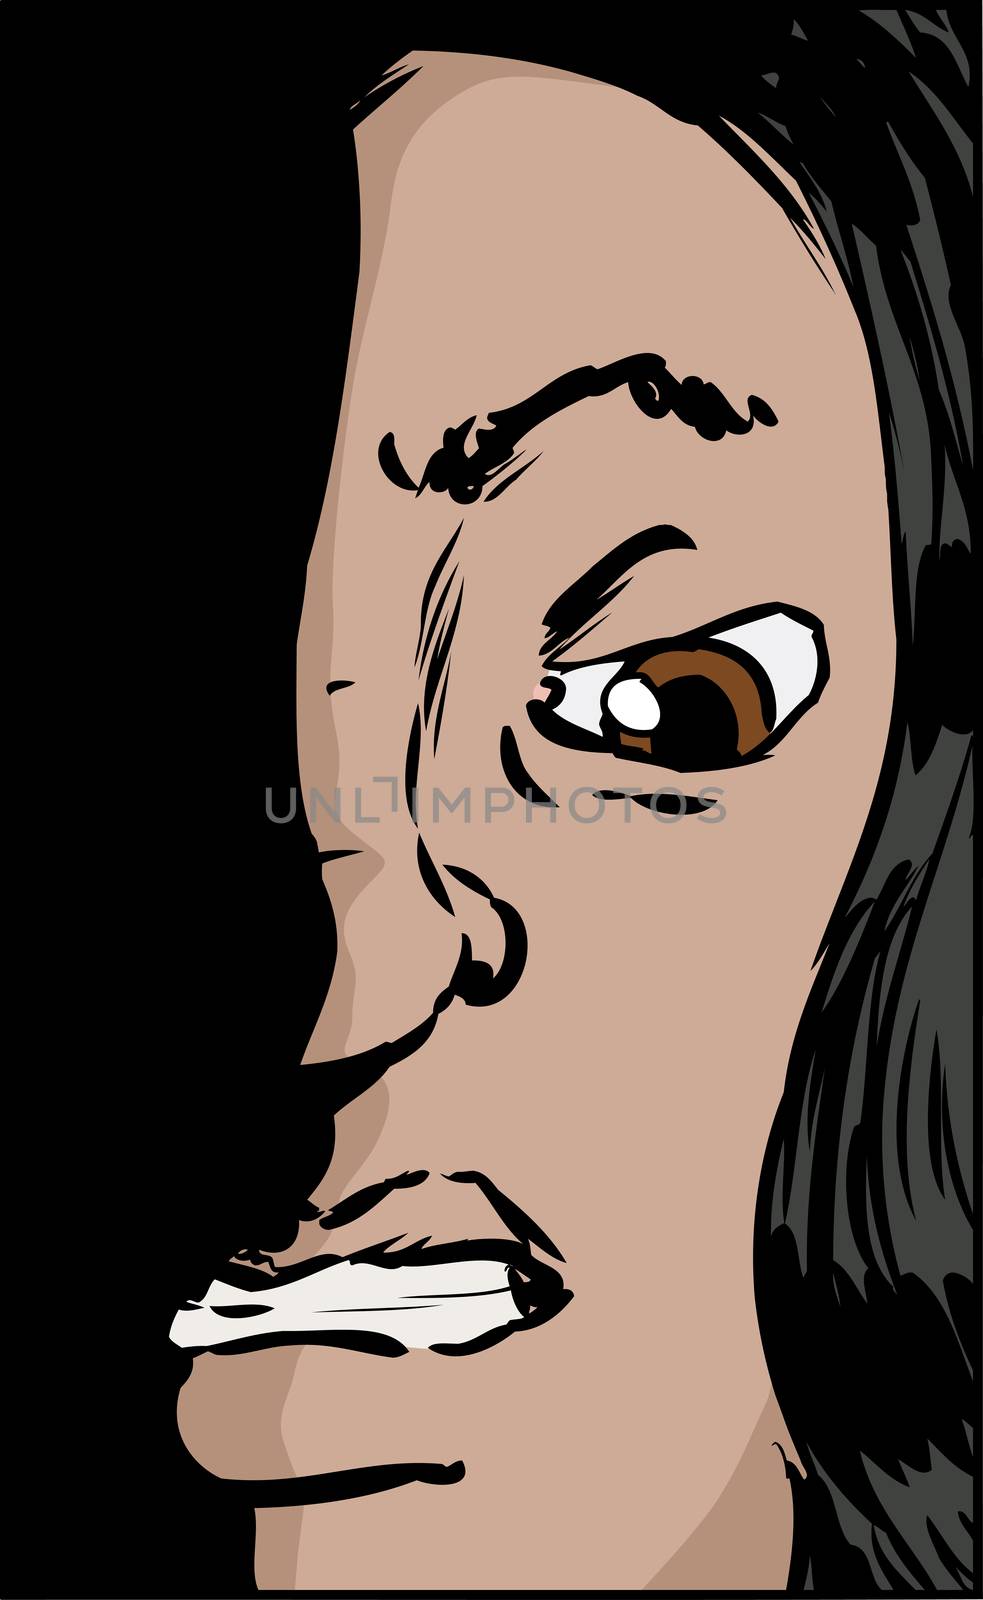 Close up illustration on face of woman with clenched teeth